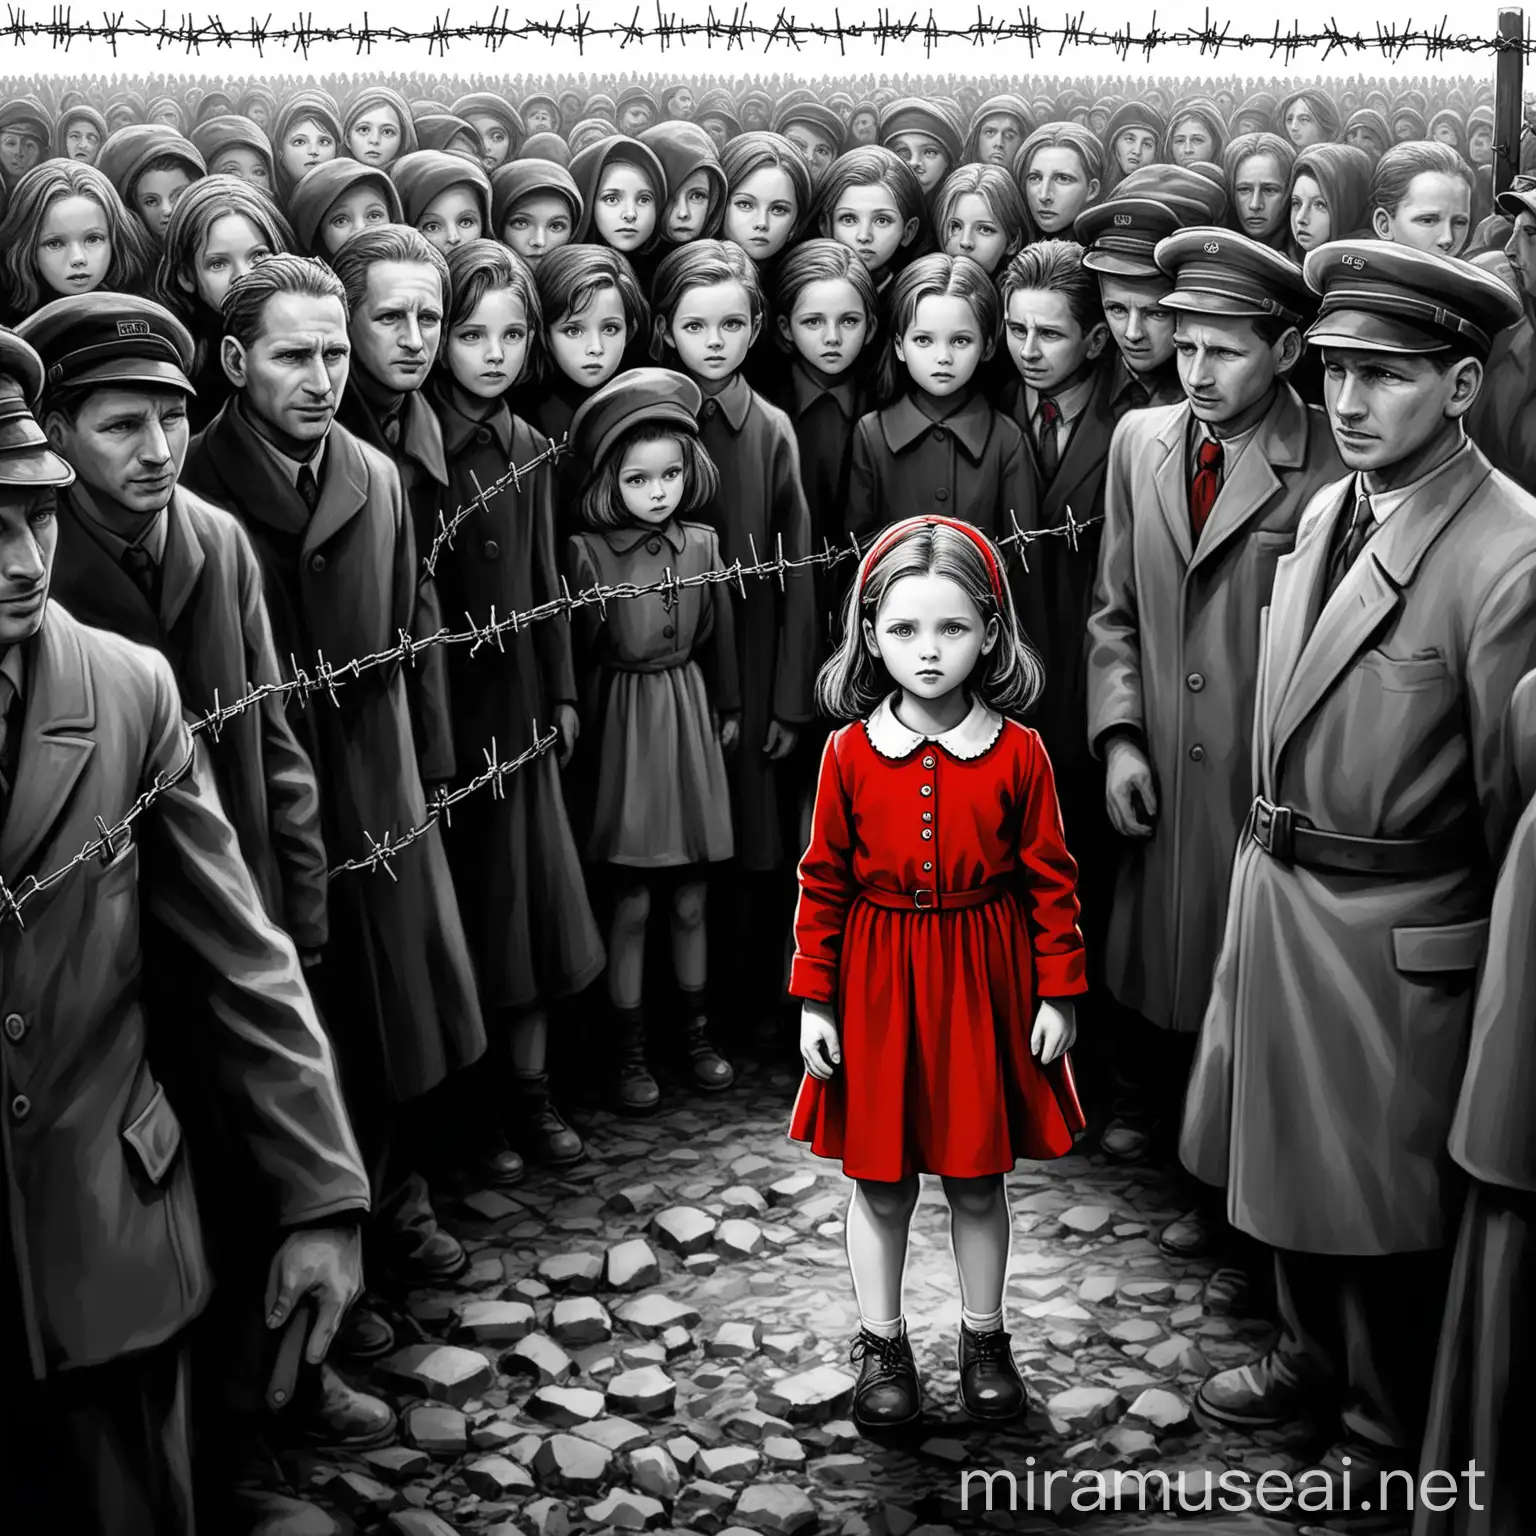 Contrasting Red Dress in Schindlers List Scene with Barbed Wire